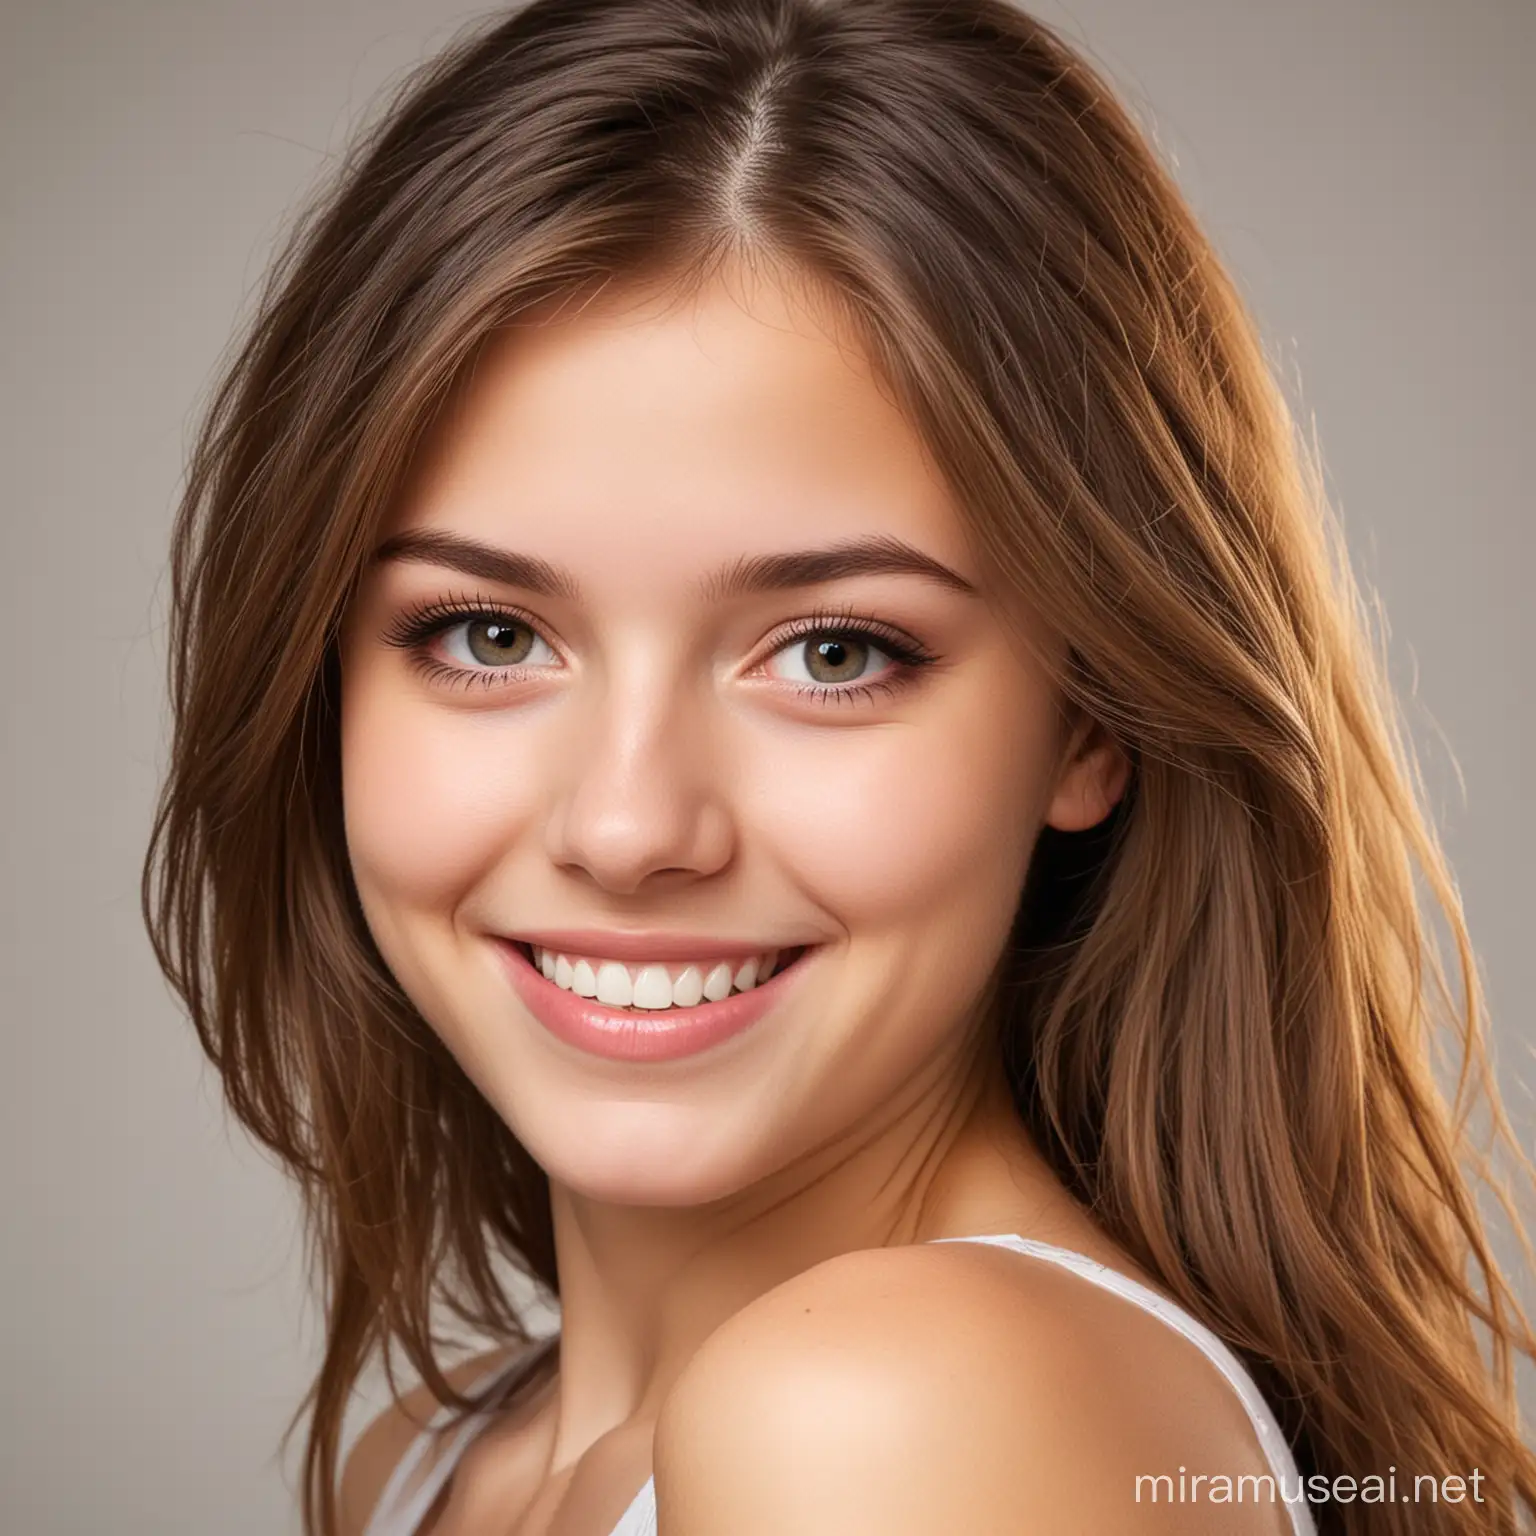 Pretty Teen Girl with Shy Smile Captured in Attractive Portrait